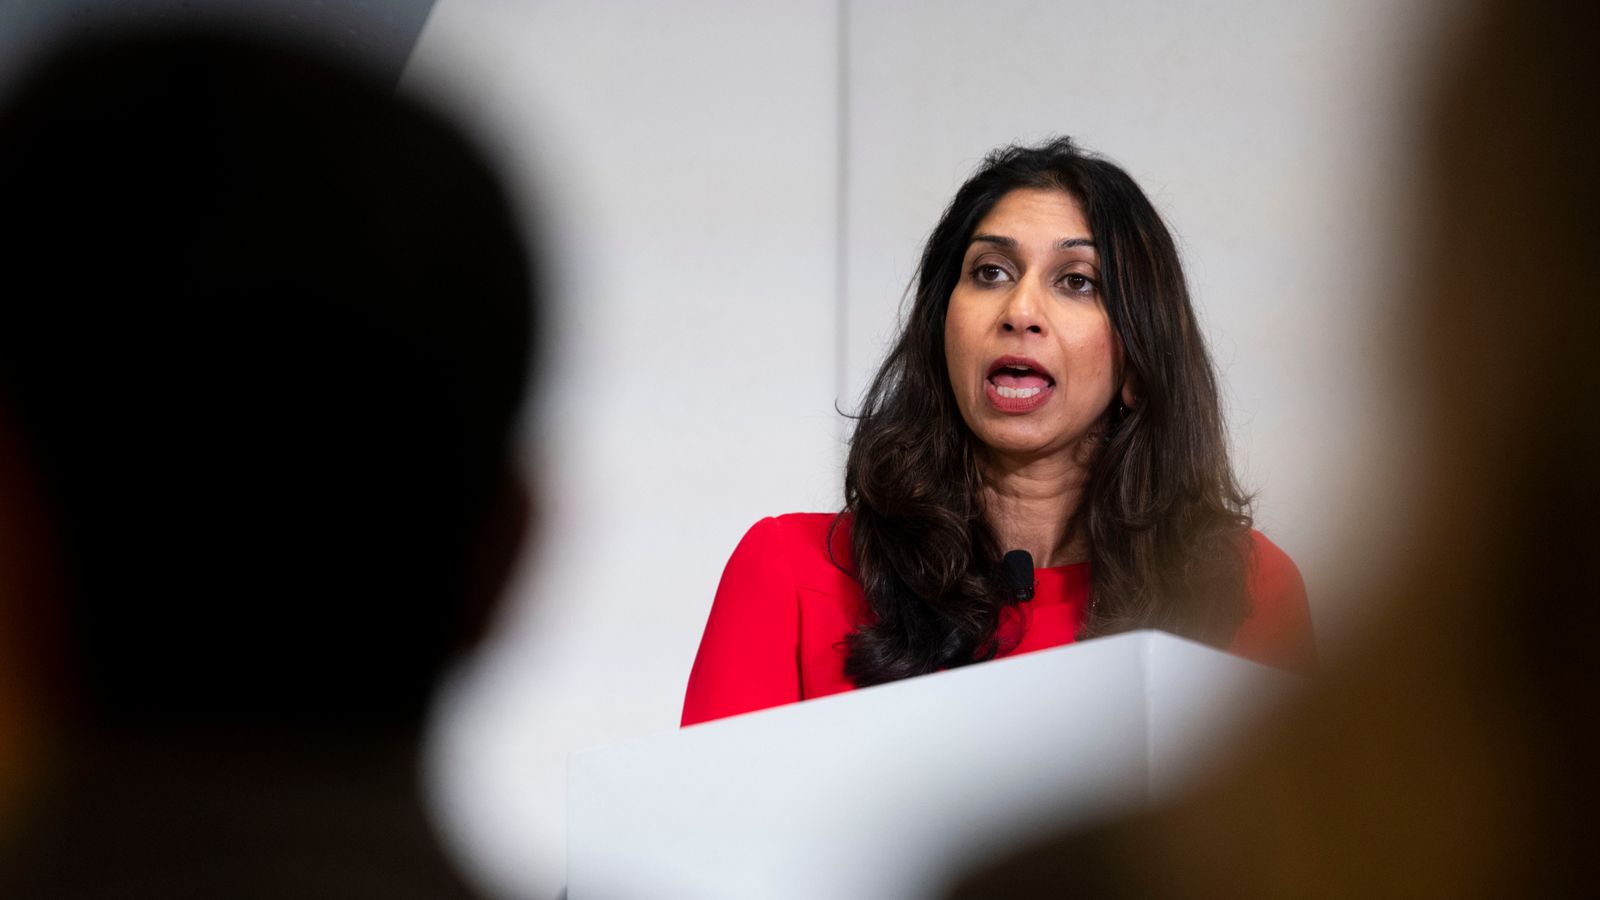 Suella Braverman is 'out of control': Home Secretary sparks fresh row over 'inflammatory' newspaper article